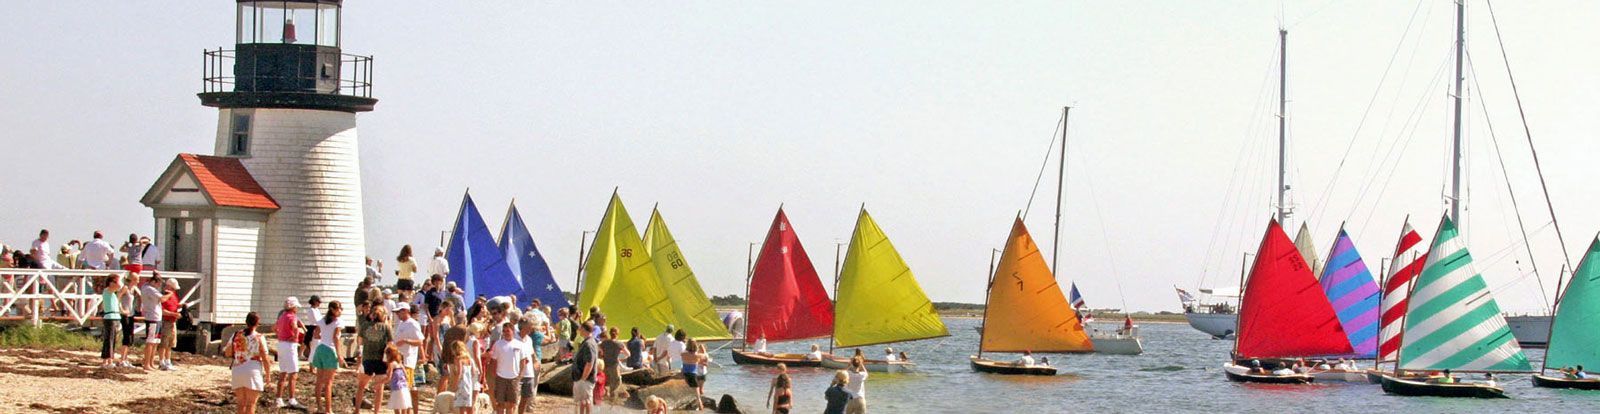 Sailboats on the water in Nantucket